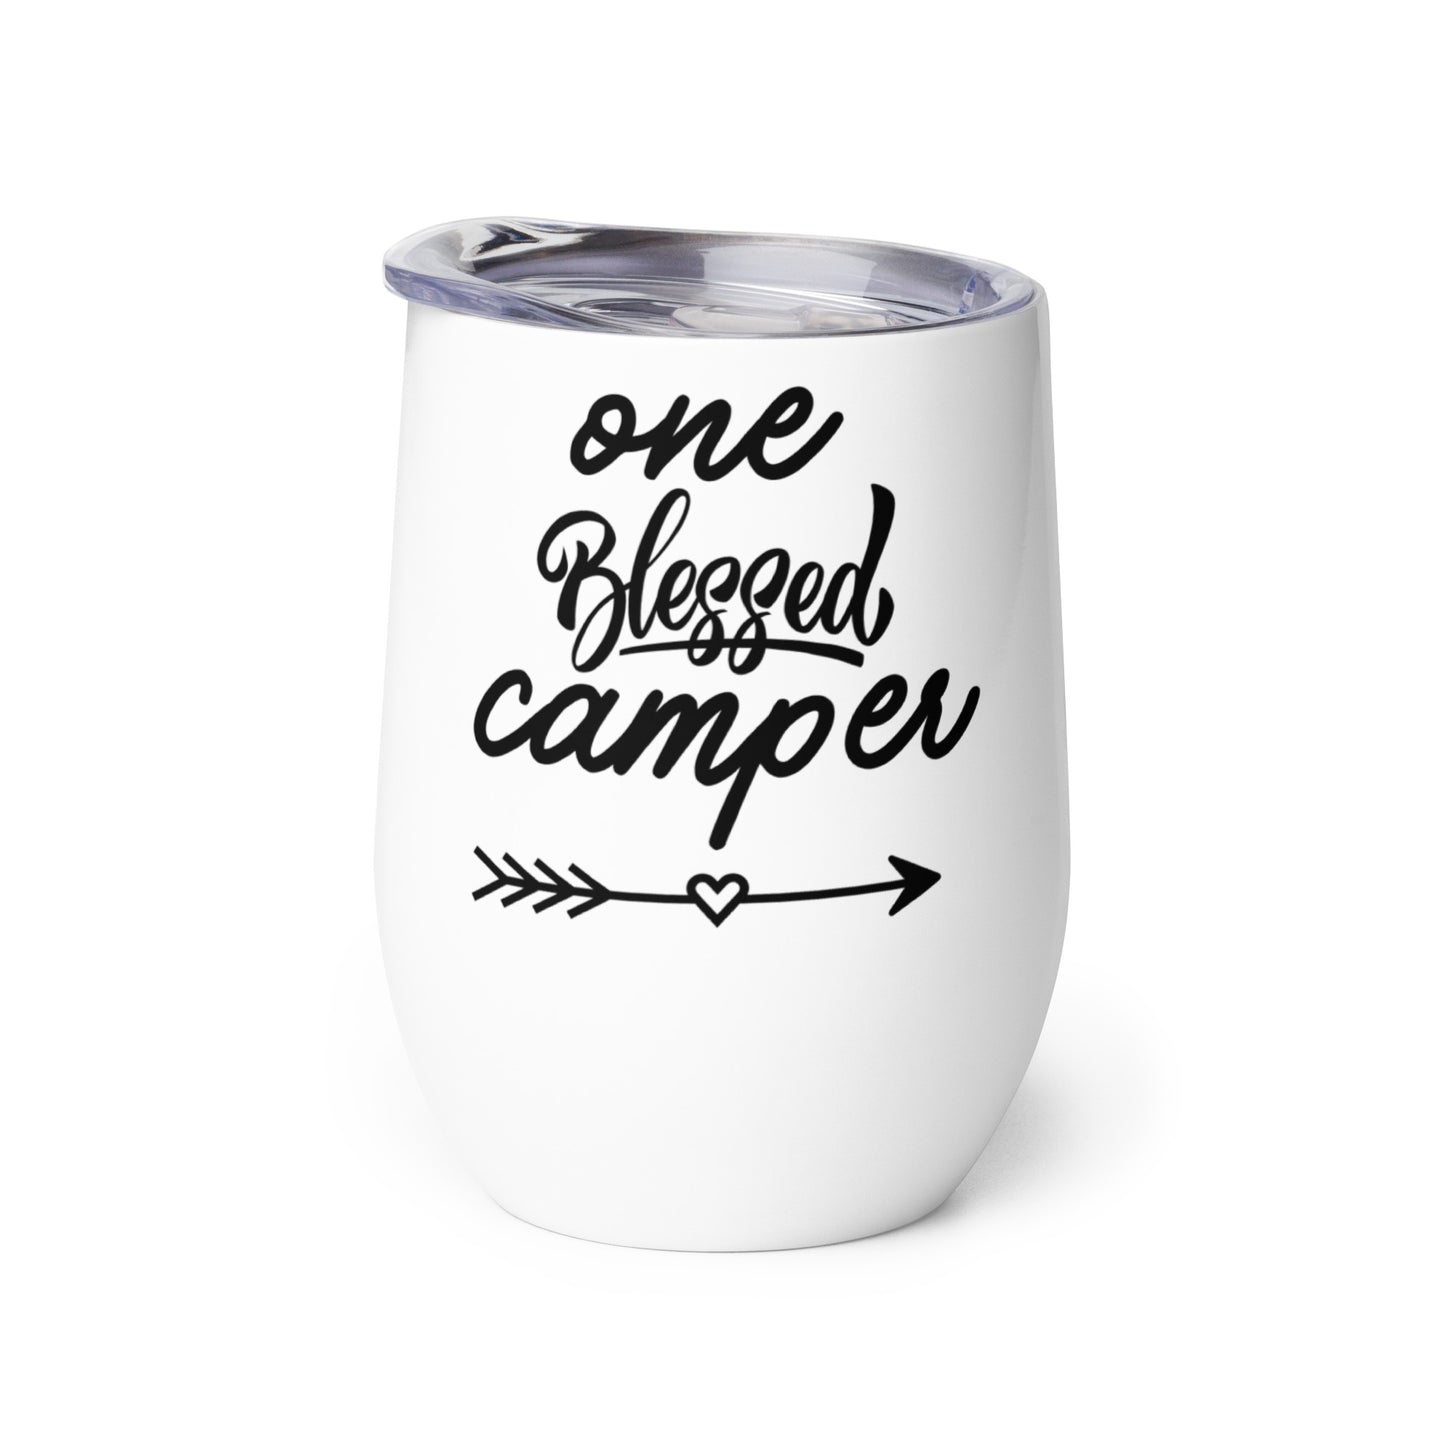 ONE BLESSED CAMPER wine tumbler